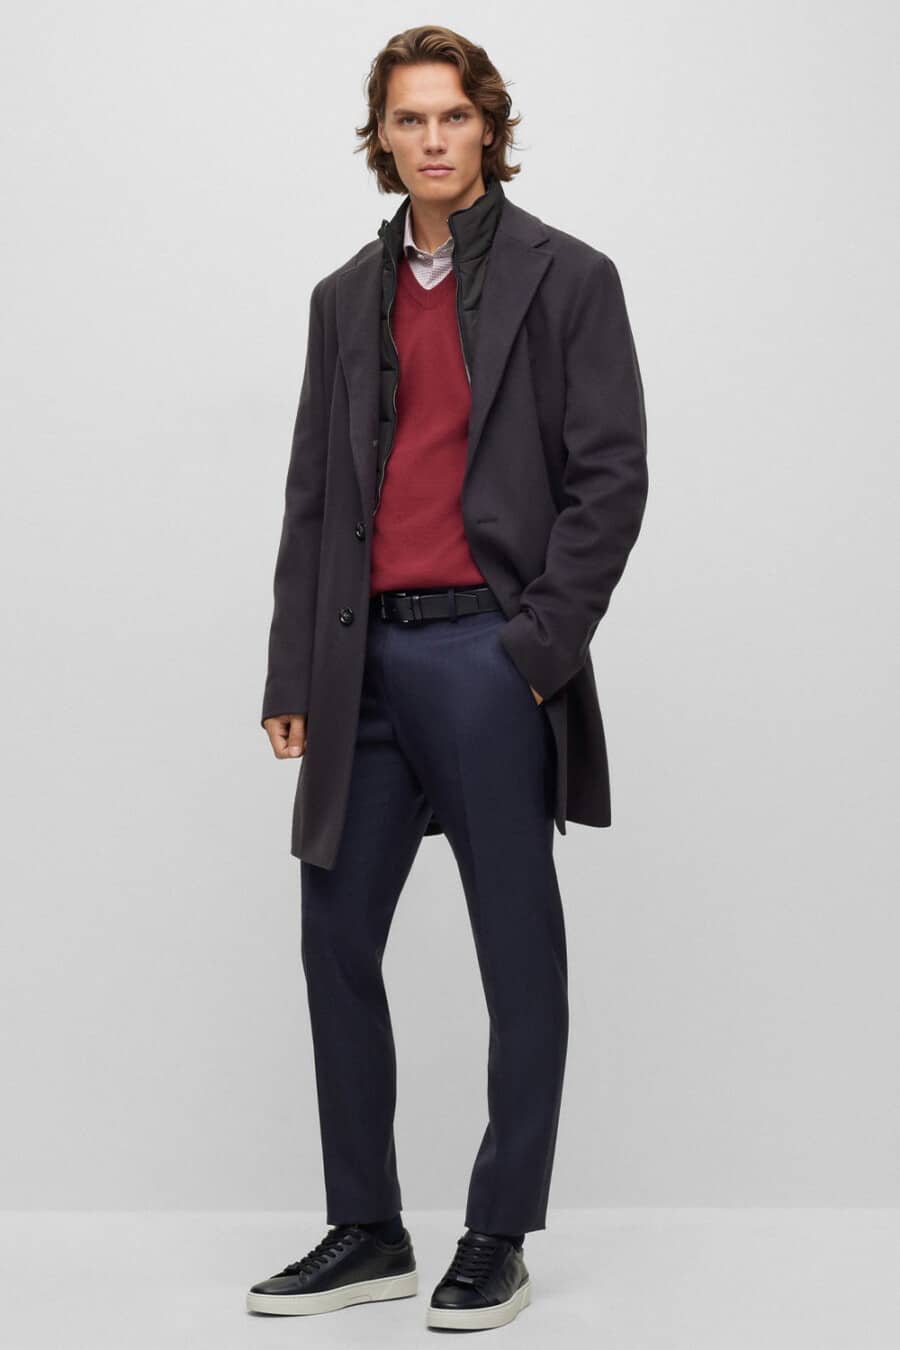 Men's navy tailored pants, pink shirt, burgundy V-neck sweater, navy trench coat and black leather sneakers outfit